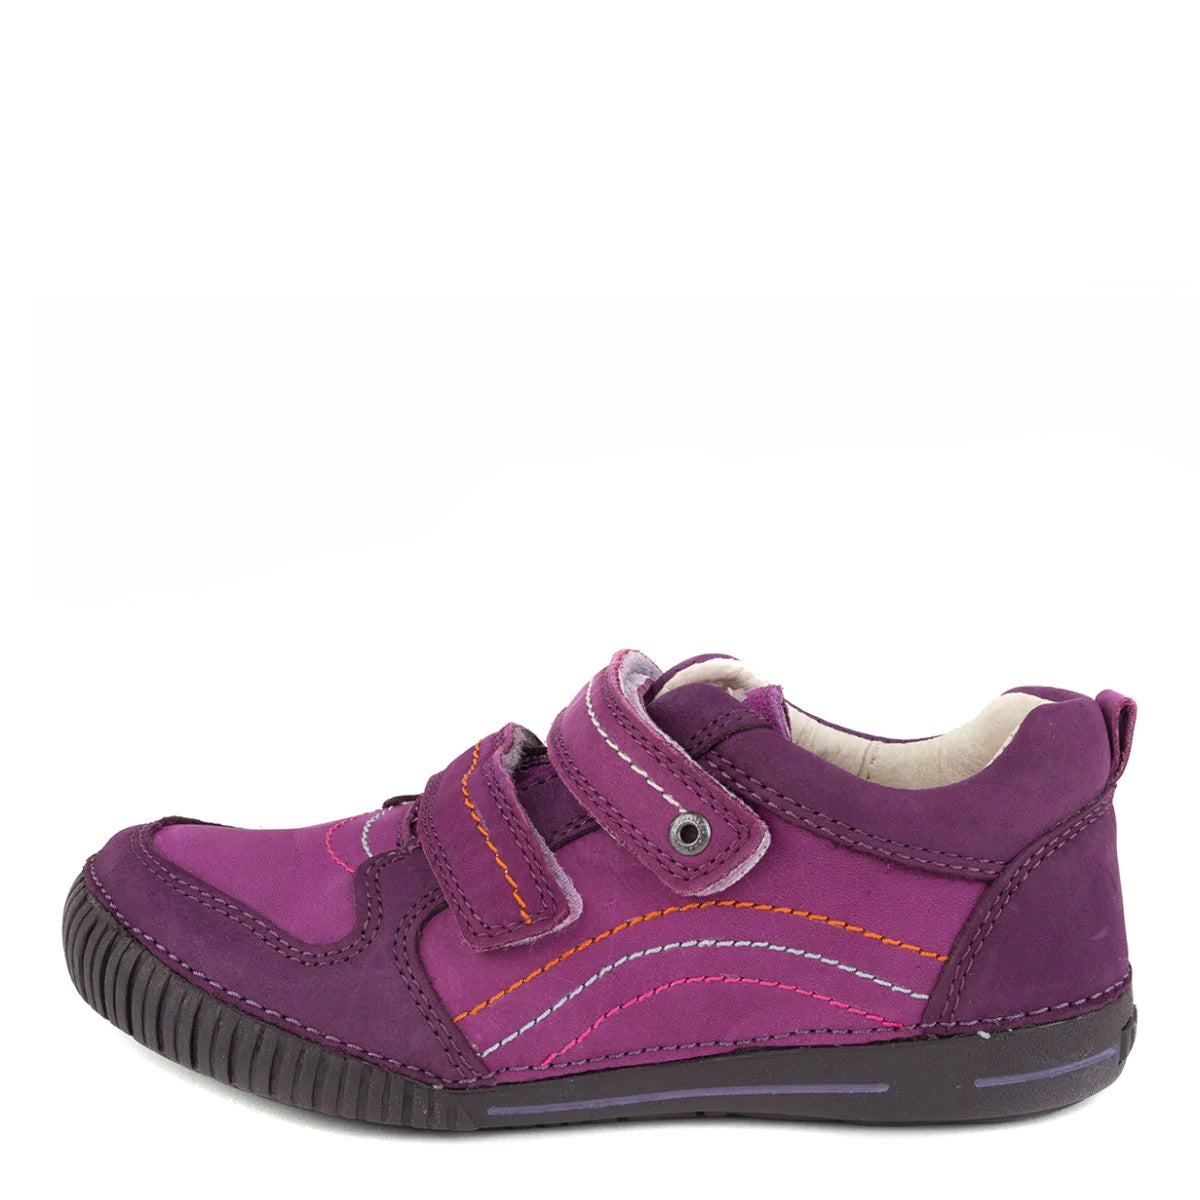 Premium quality shoes with genuine leather lining and upper in violet with double velcro strap. Thanks to its high level of specialization, D.D. Step knows exactly what your child’s feet need, to develop properly in the various phases of growth. The exceptional comfort these shoes provide assure the well-being and happiness of your child.